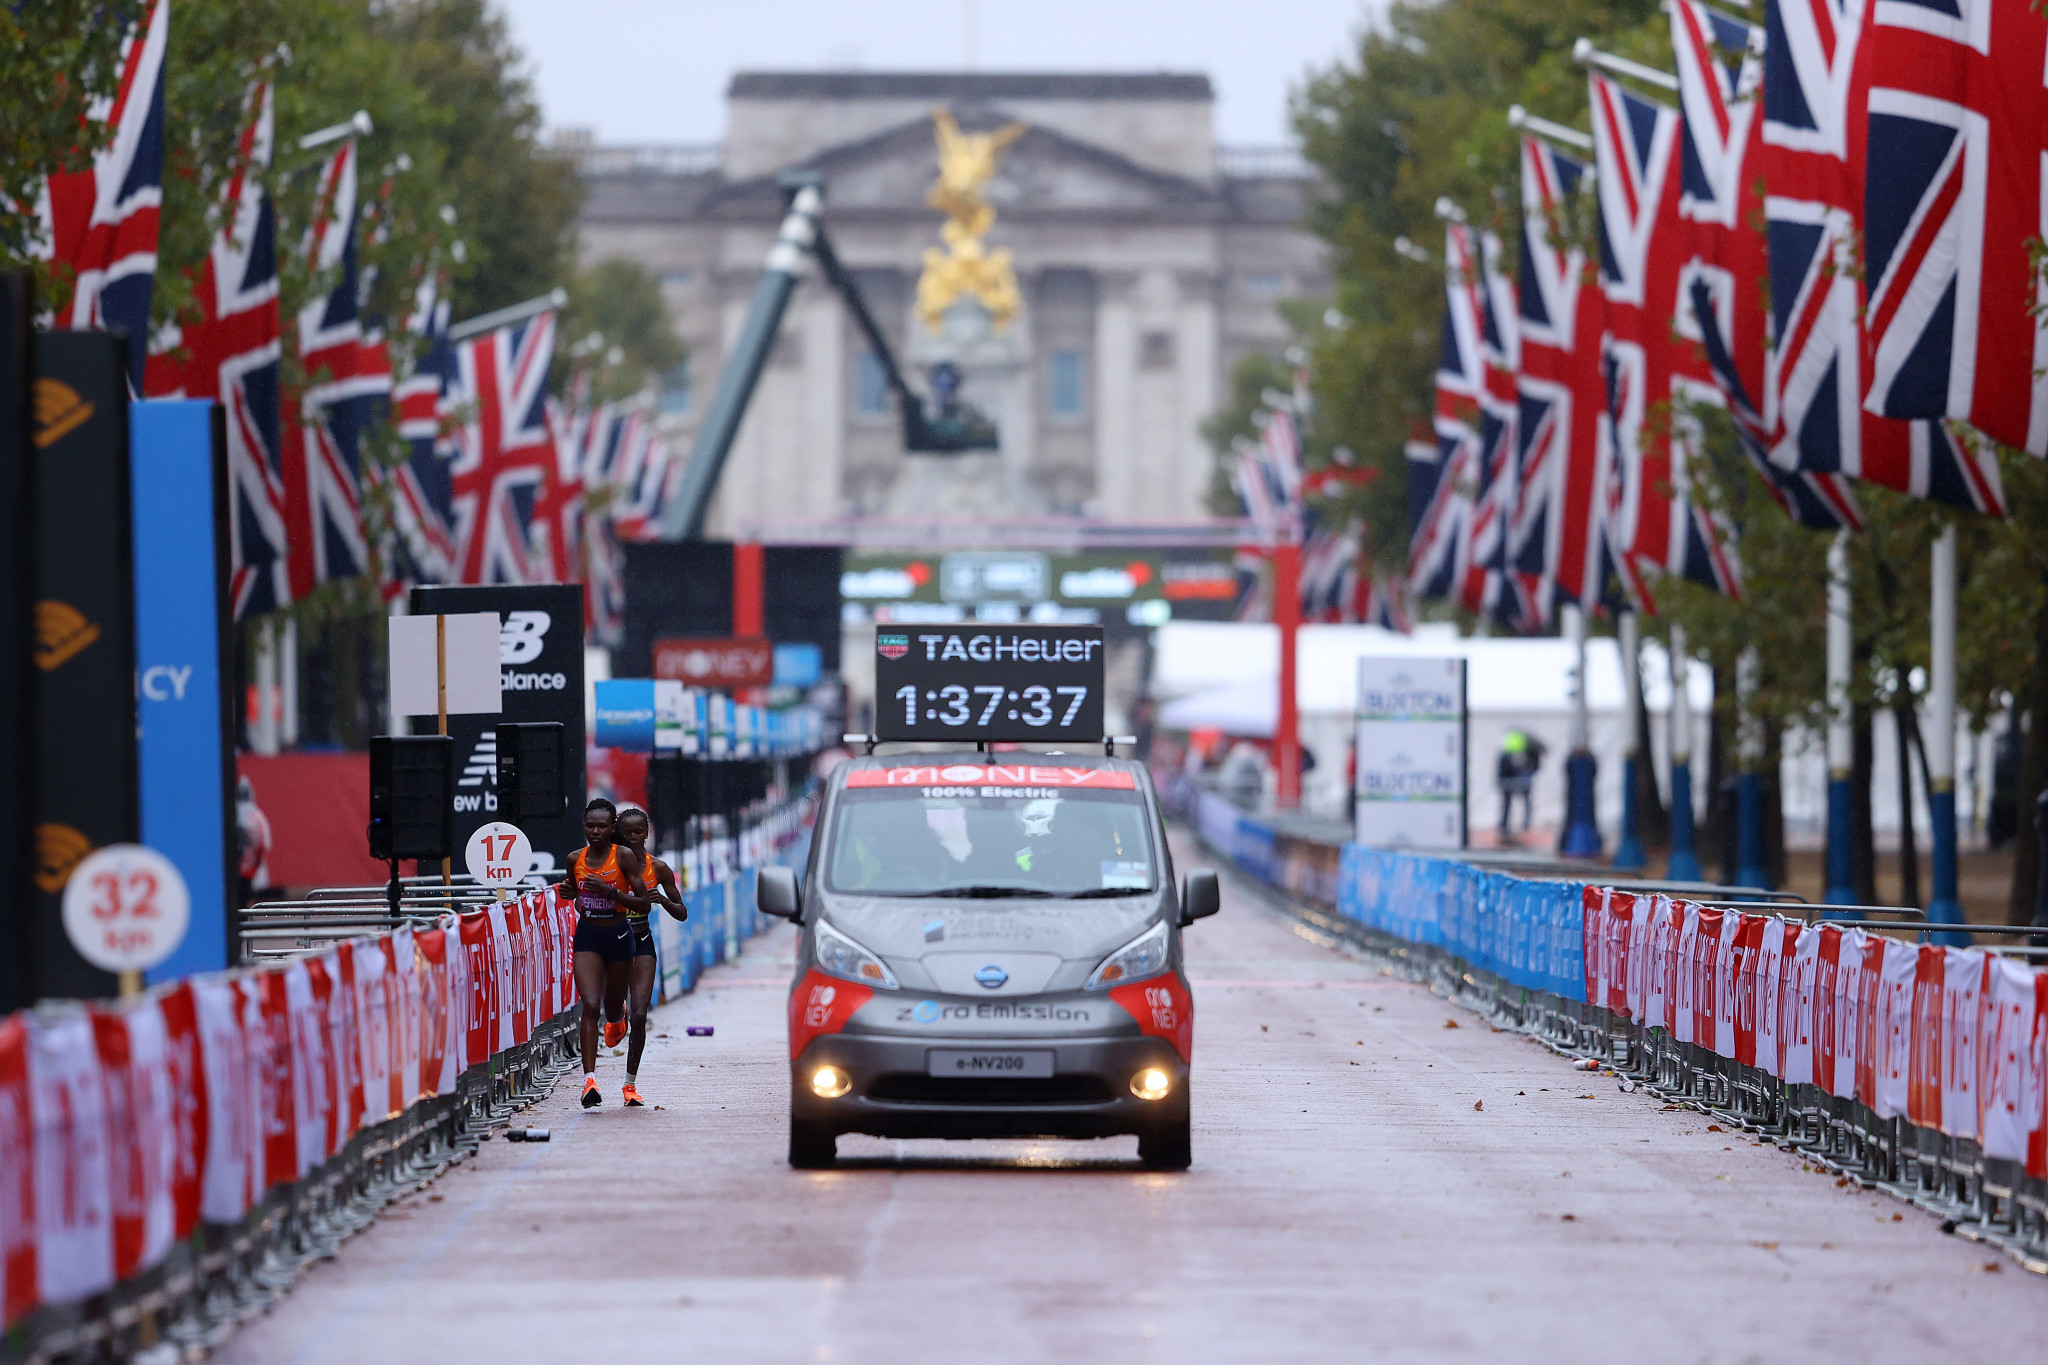 Last year's London Marathon was held on a closed loop due to COVID-19 restrictions ©Getty Images